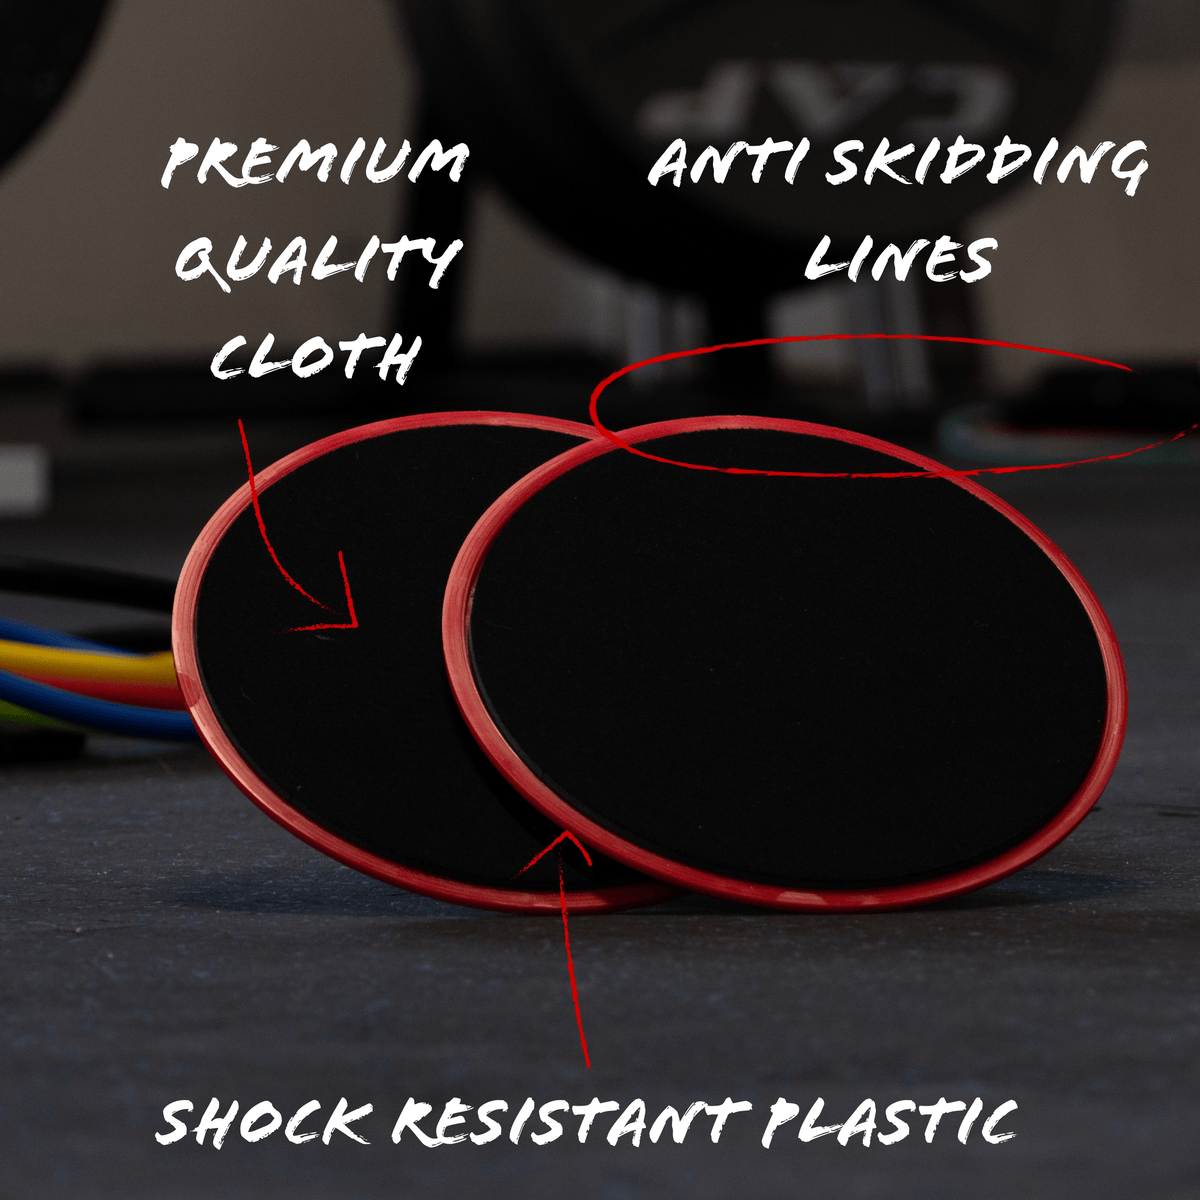 Red sports sliders have shock resistant plastic, quality cloth, and anti skidding lines. 